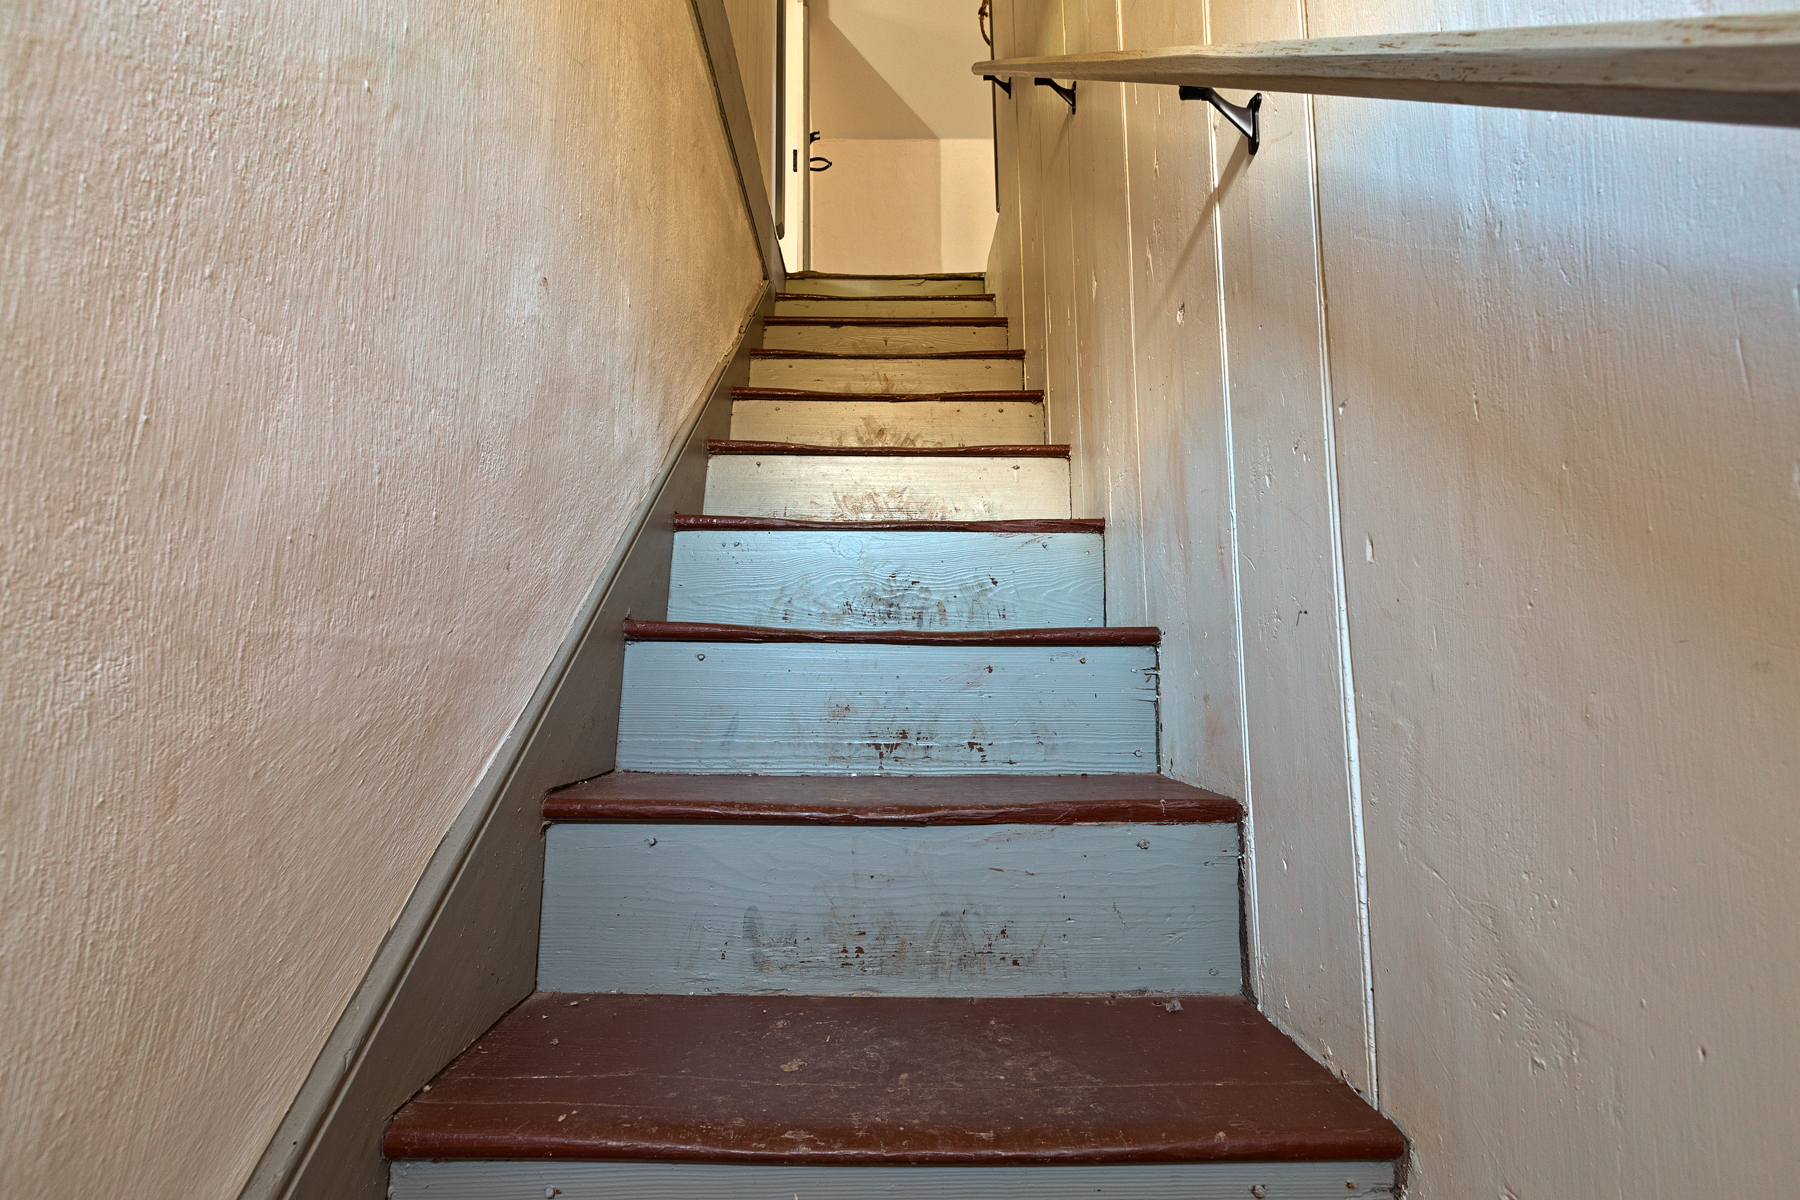 Lockhouse staircase - hdr photo